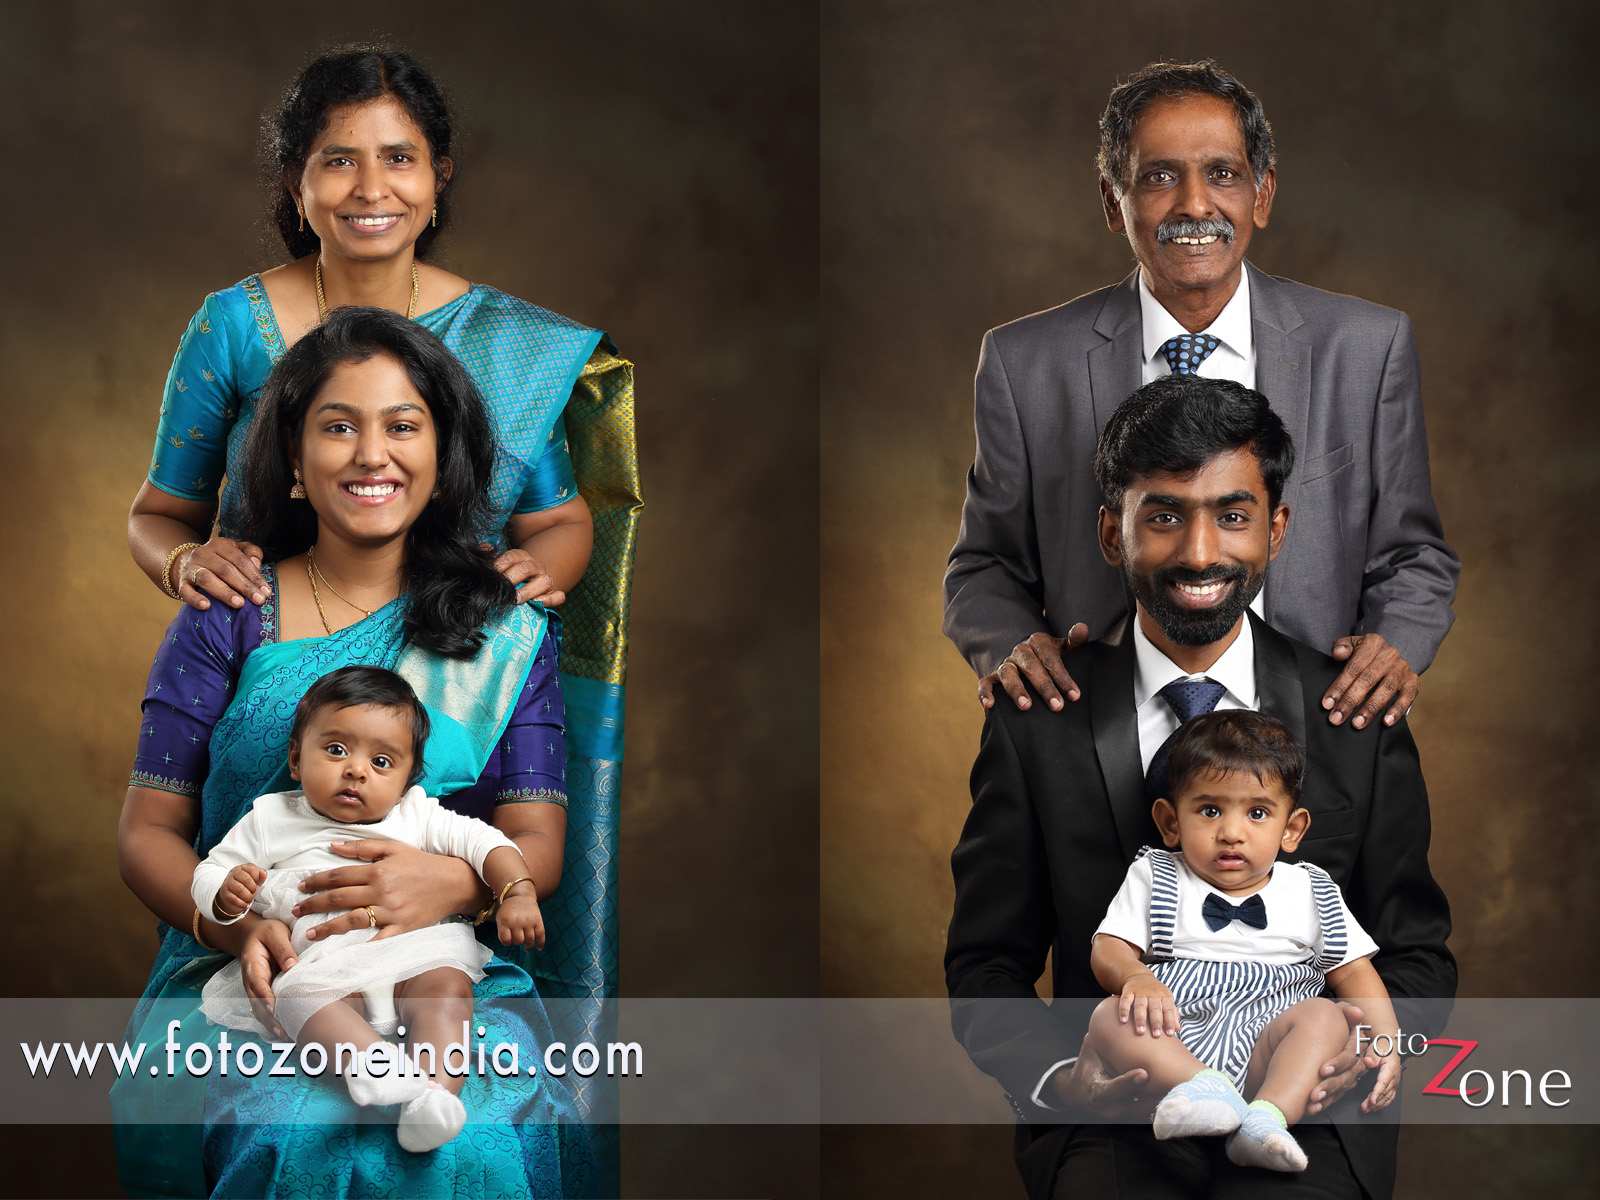 Happy Young Family Pretty Child Posing Stock Photo 63840121 | Shutterstock